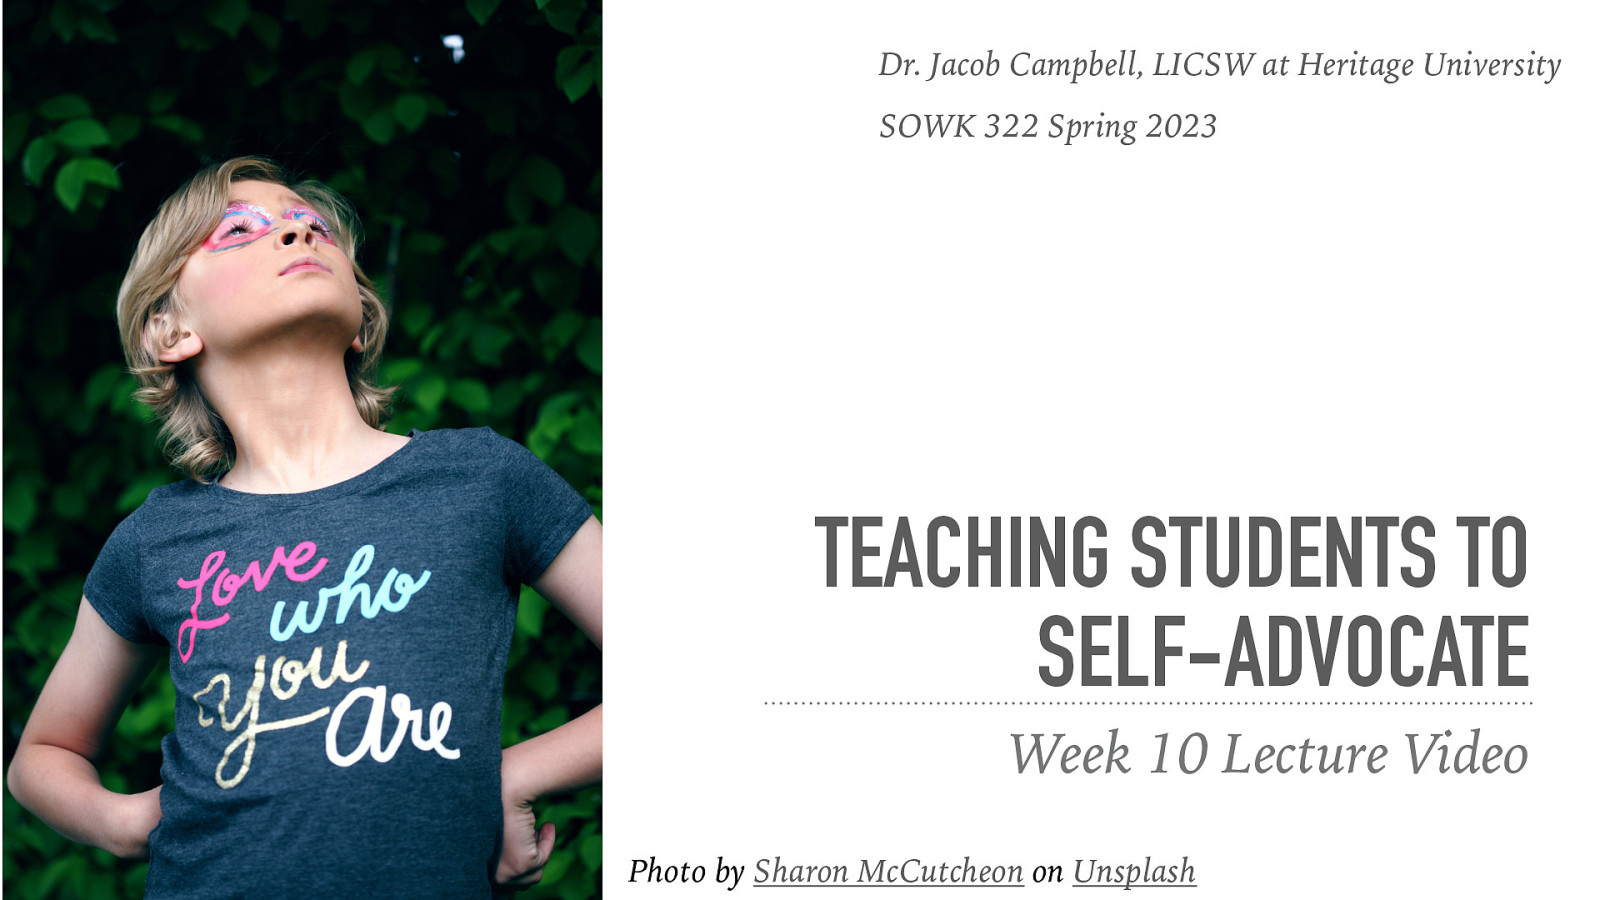 Spring 2023 SOWK 322 Week 10 - Teaching Students to Self-Advocate by Jacob Campbell